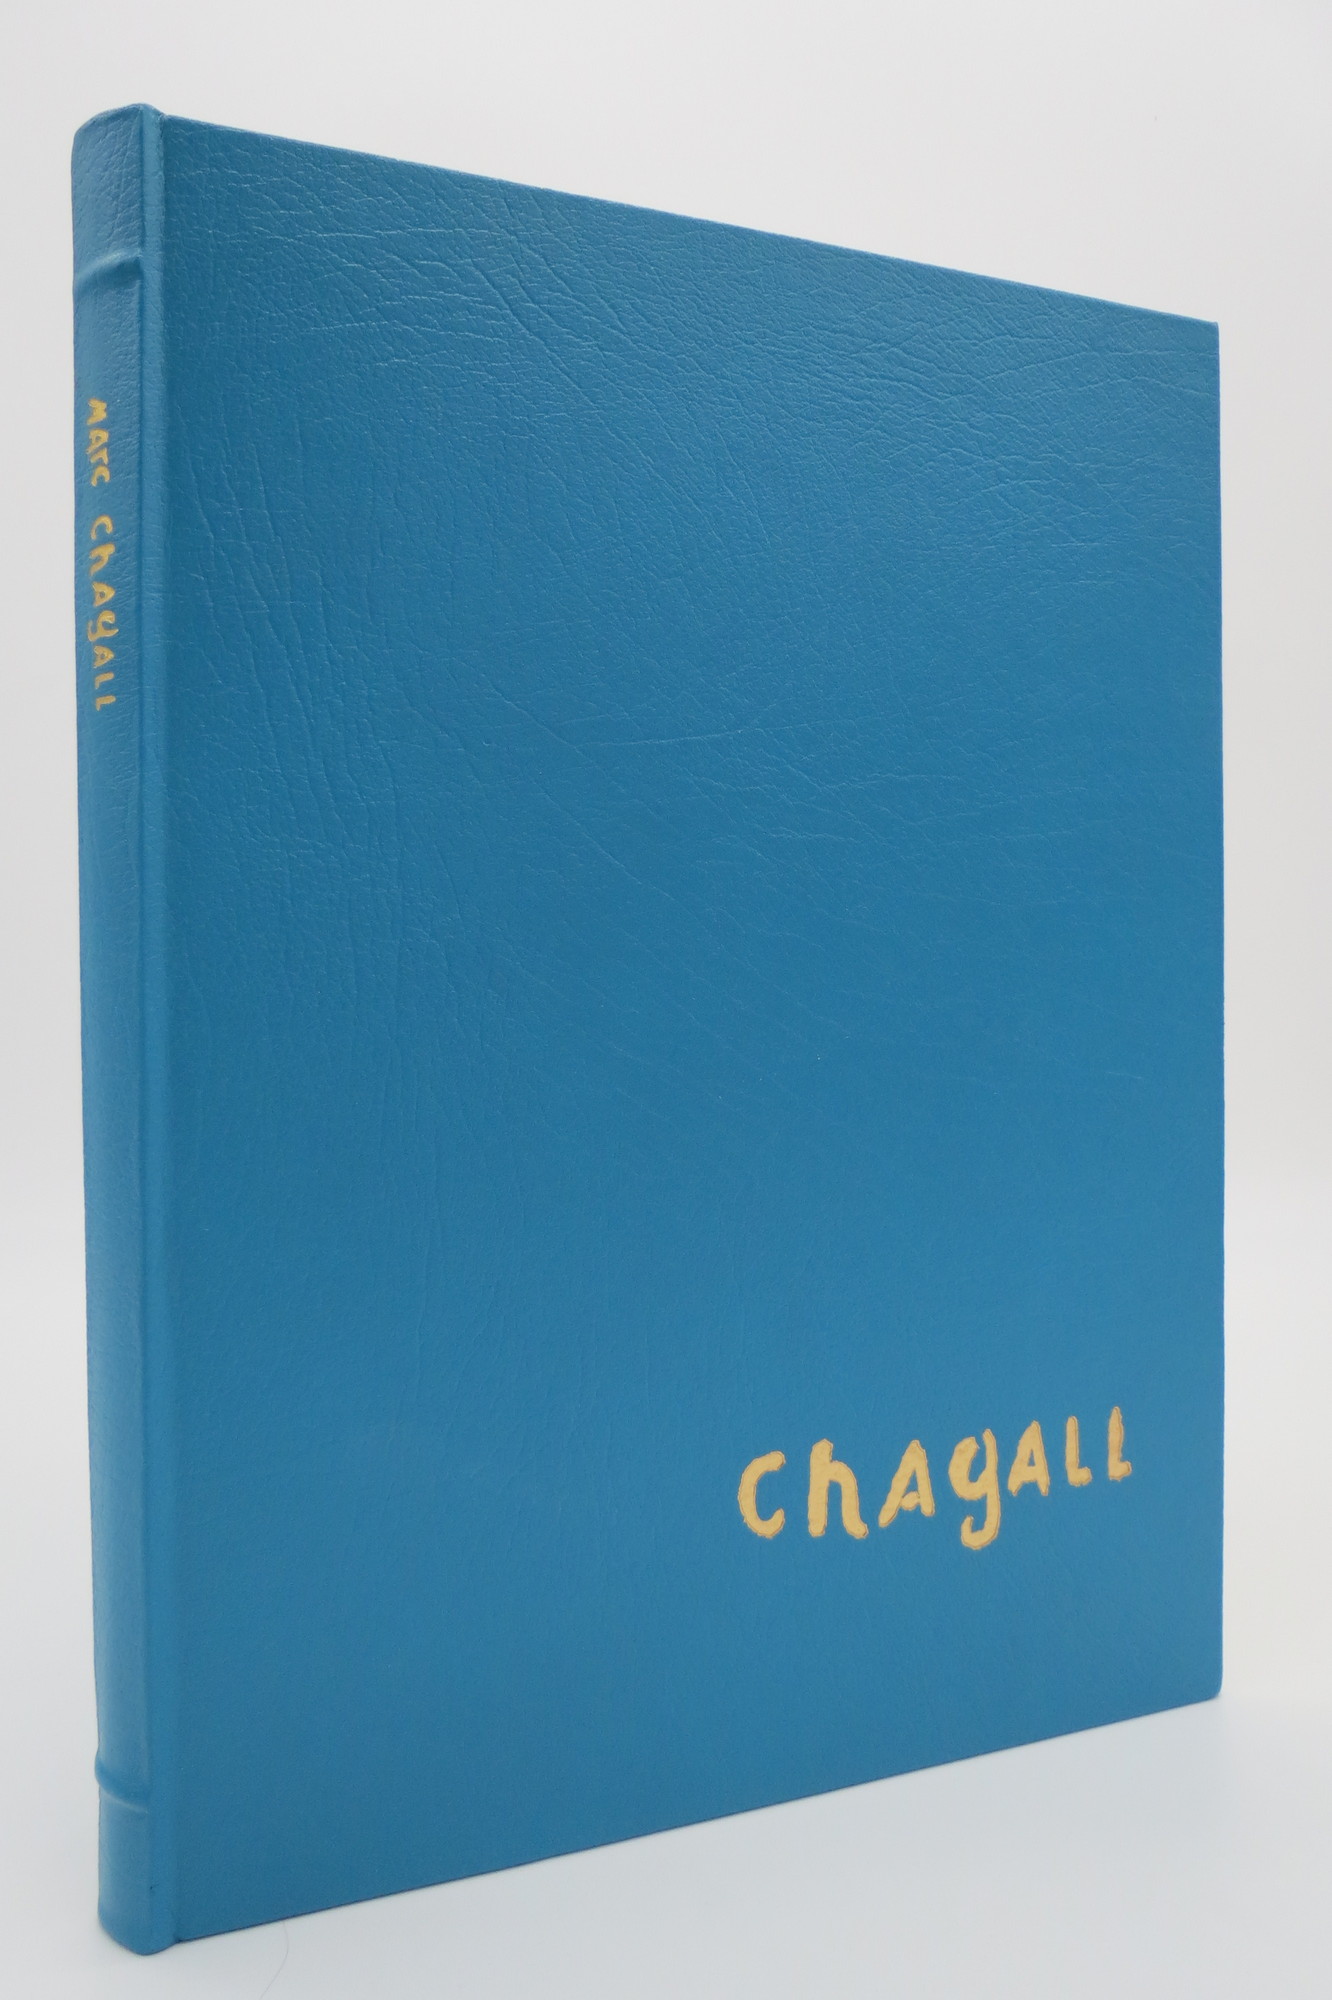 Image for MARC CHAGALL (GREAT ART AND ARTISTS)  (Leather Bound)  (Provenance: Israeli Artist Avraham Loewenthal)